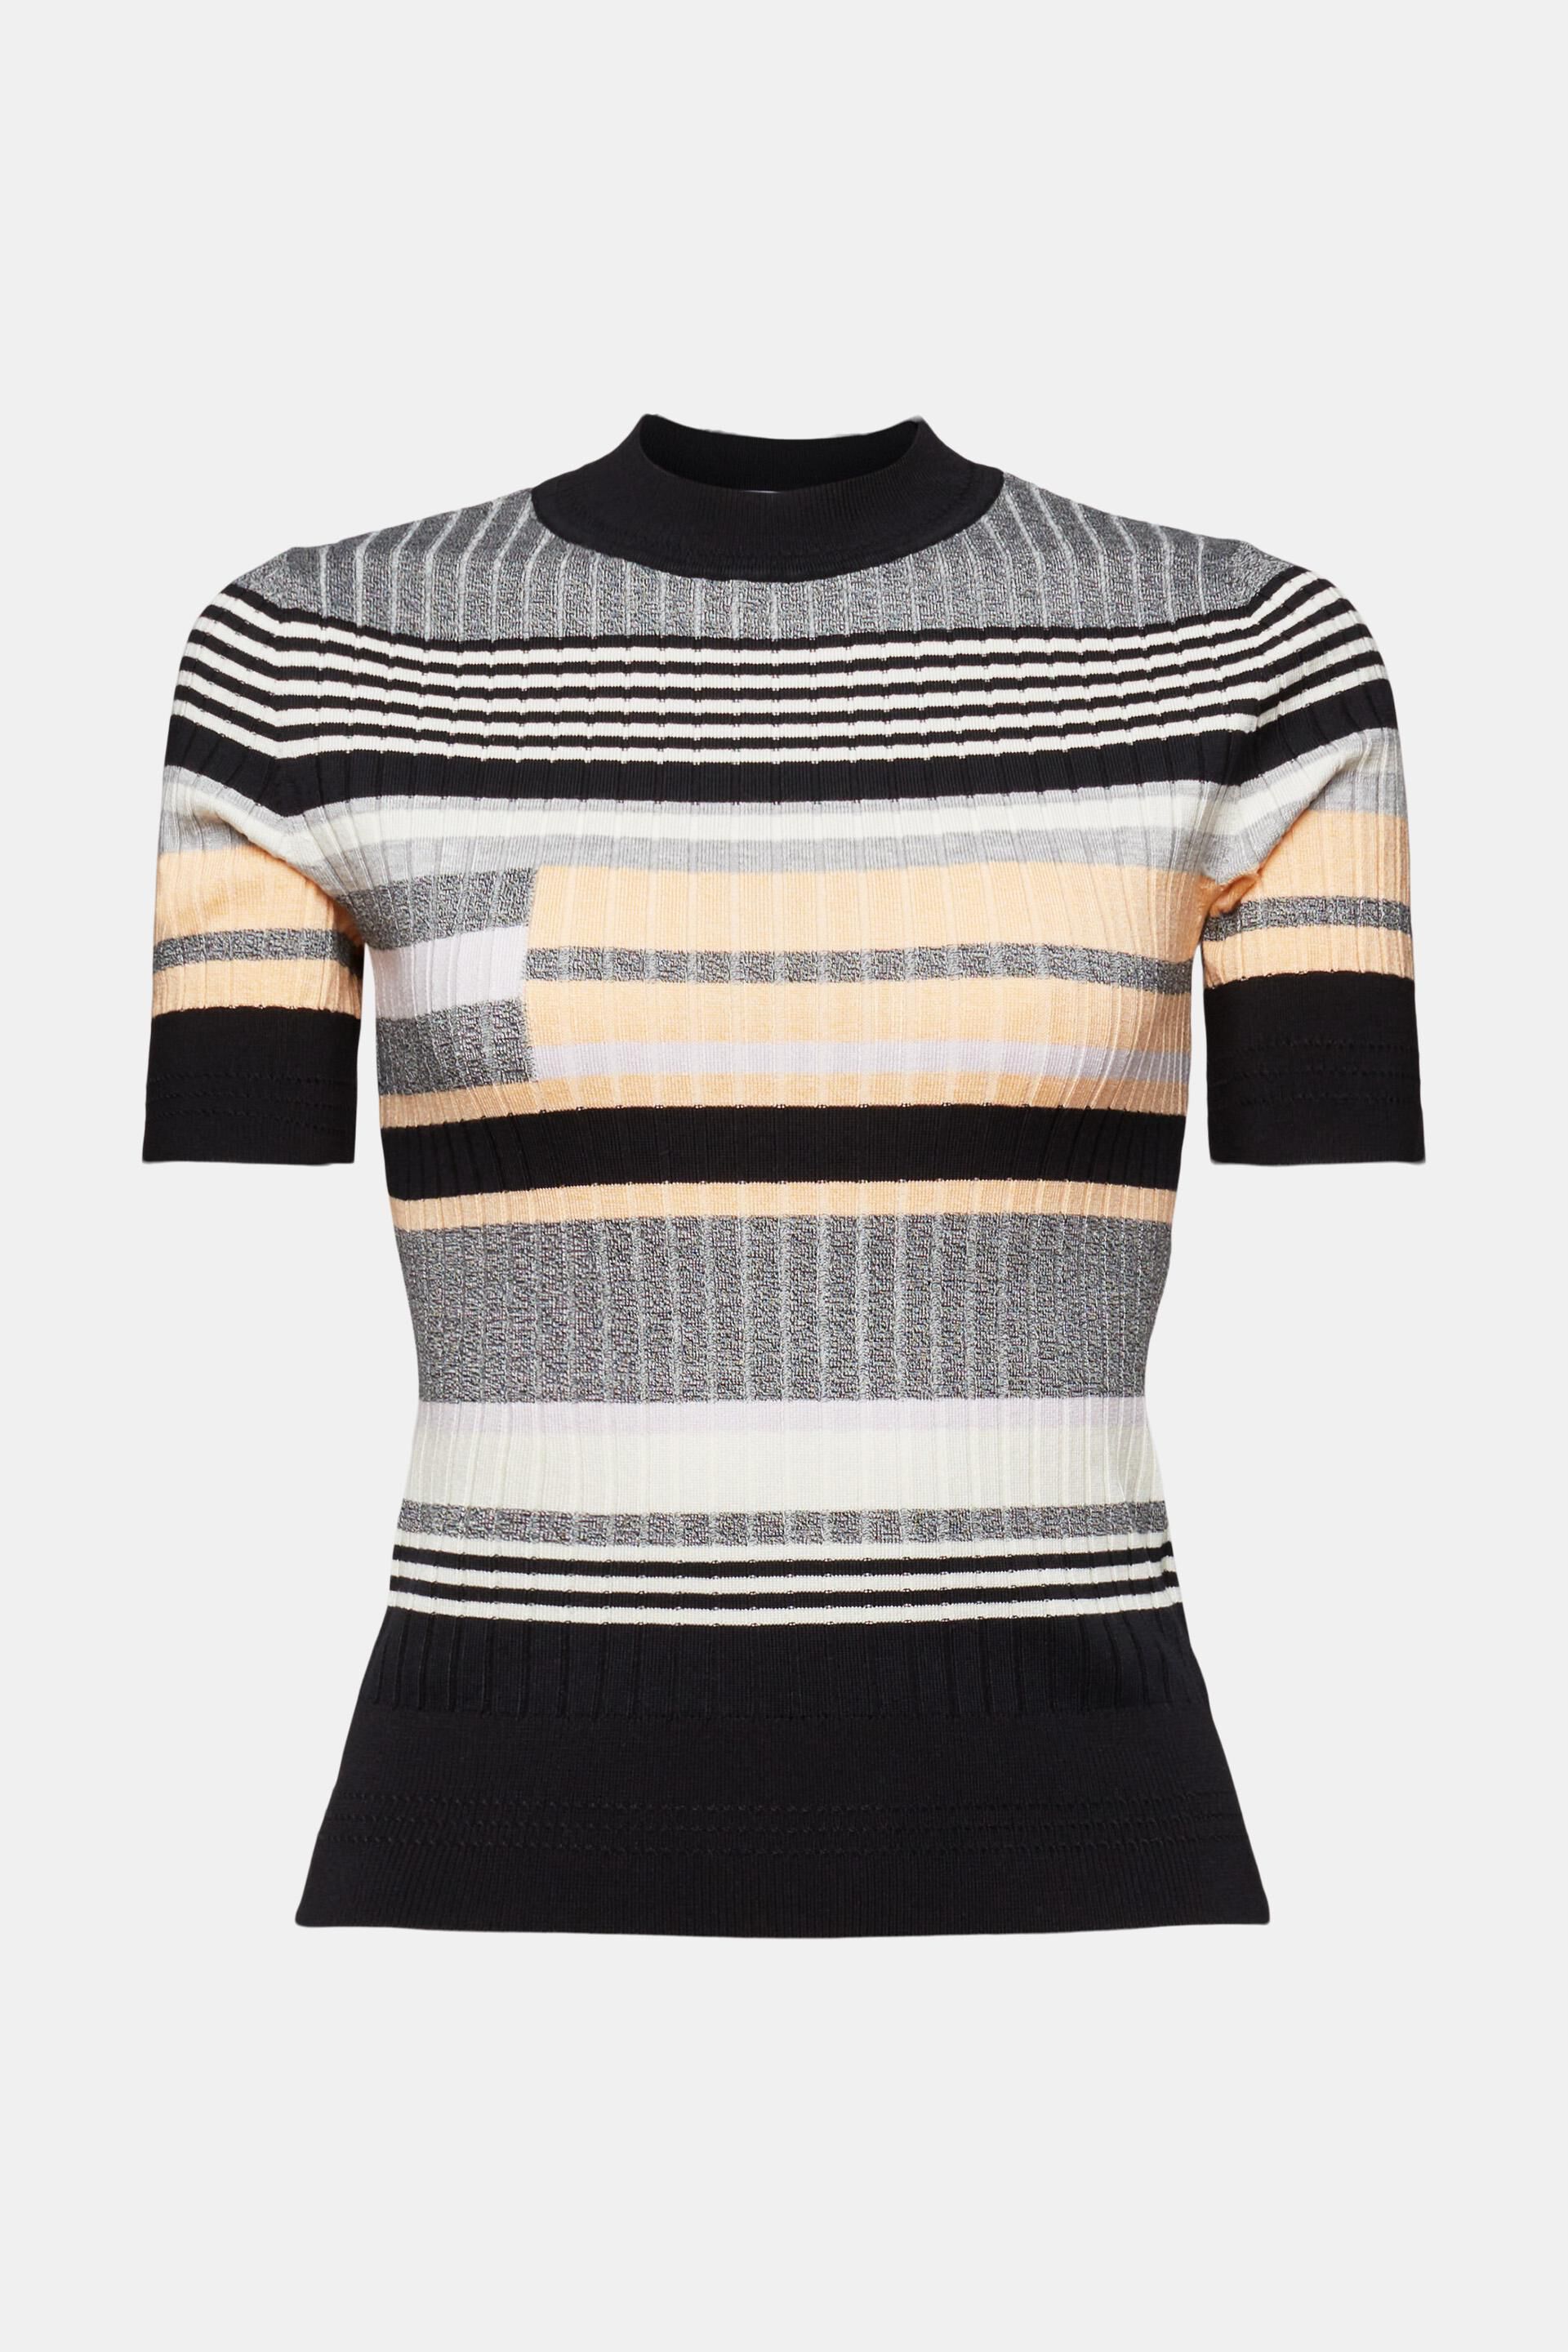 ESPRIT - Short-Sleeve Intarsia Sweater at our online shop